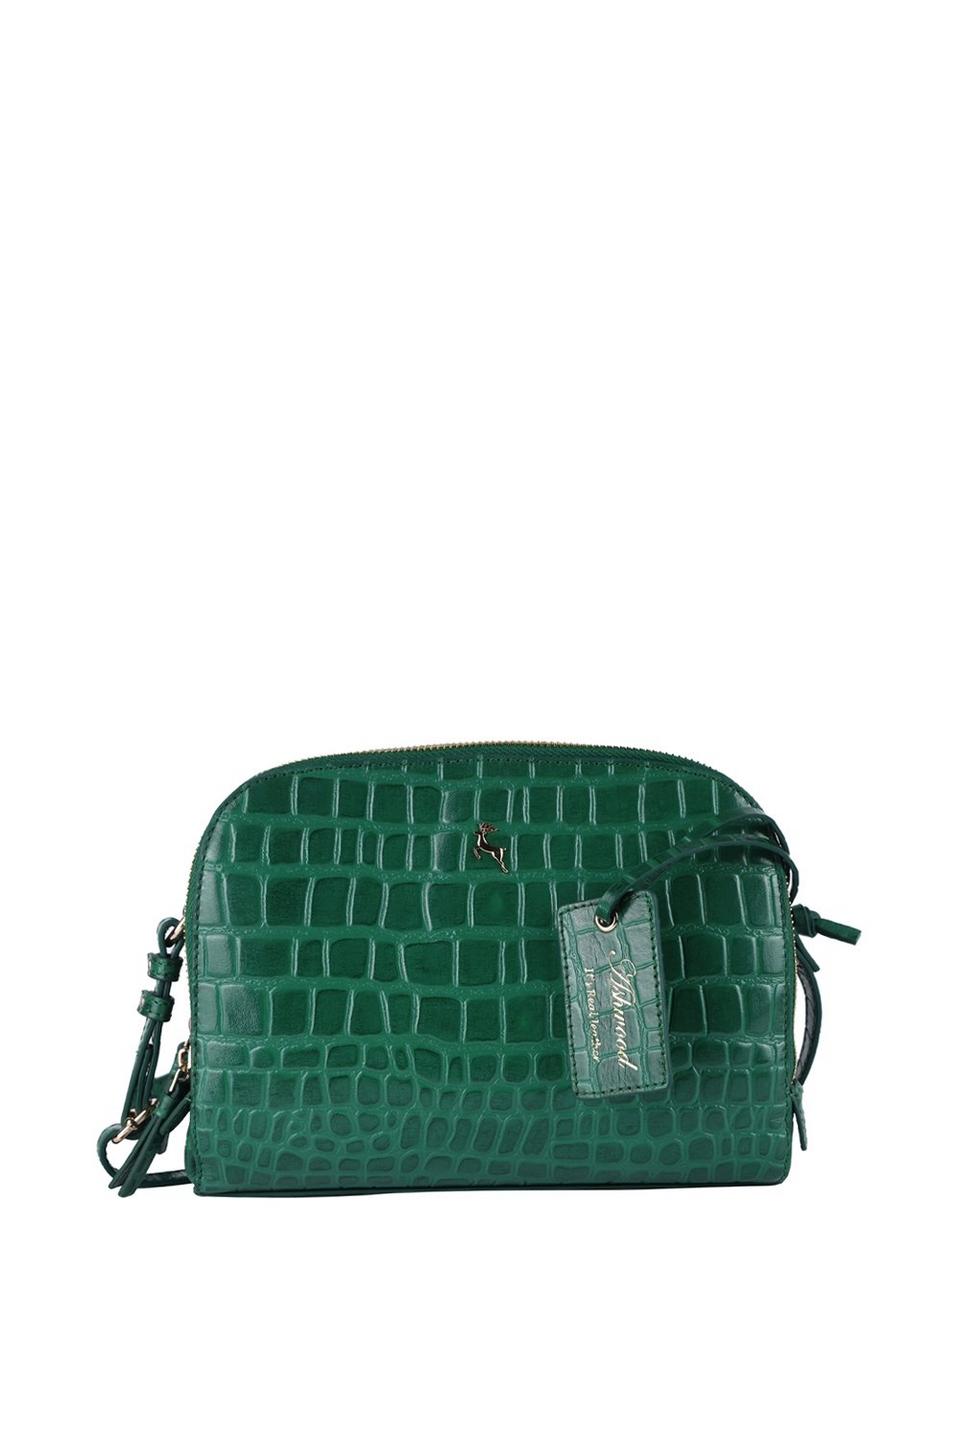 Bags & Purses, 'Classy' Croc Embossed Leather Three Section Cross Body Bag